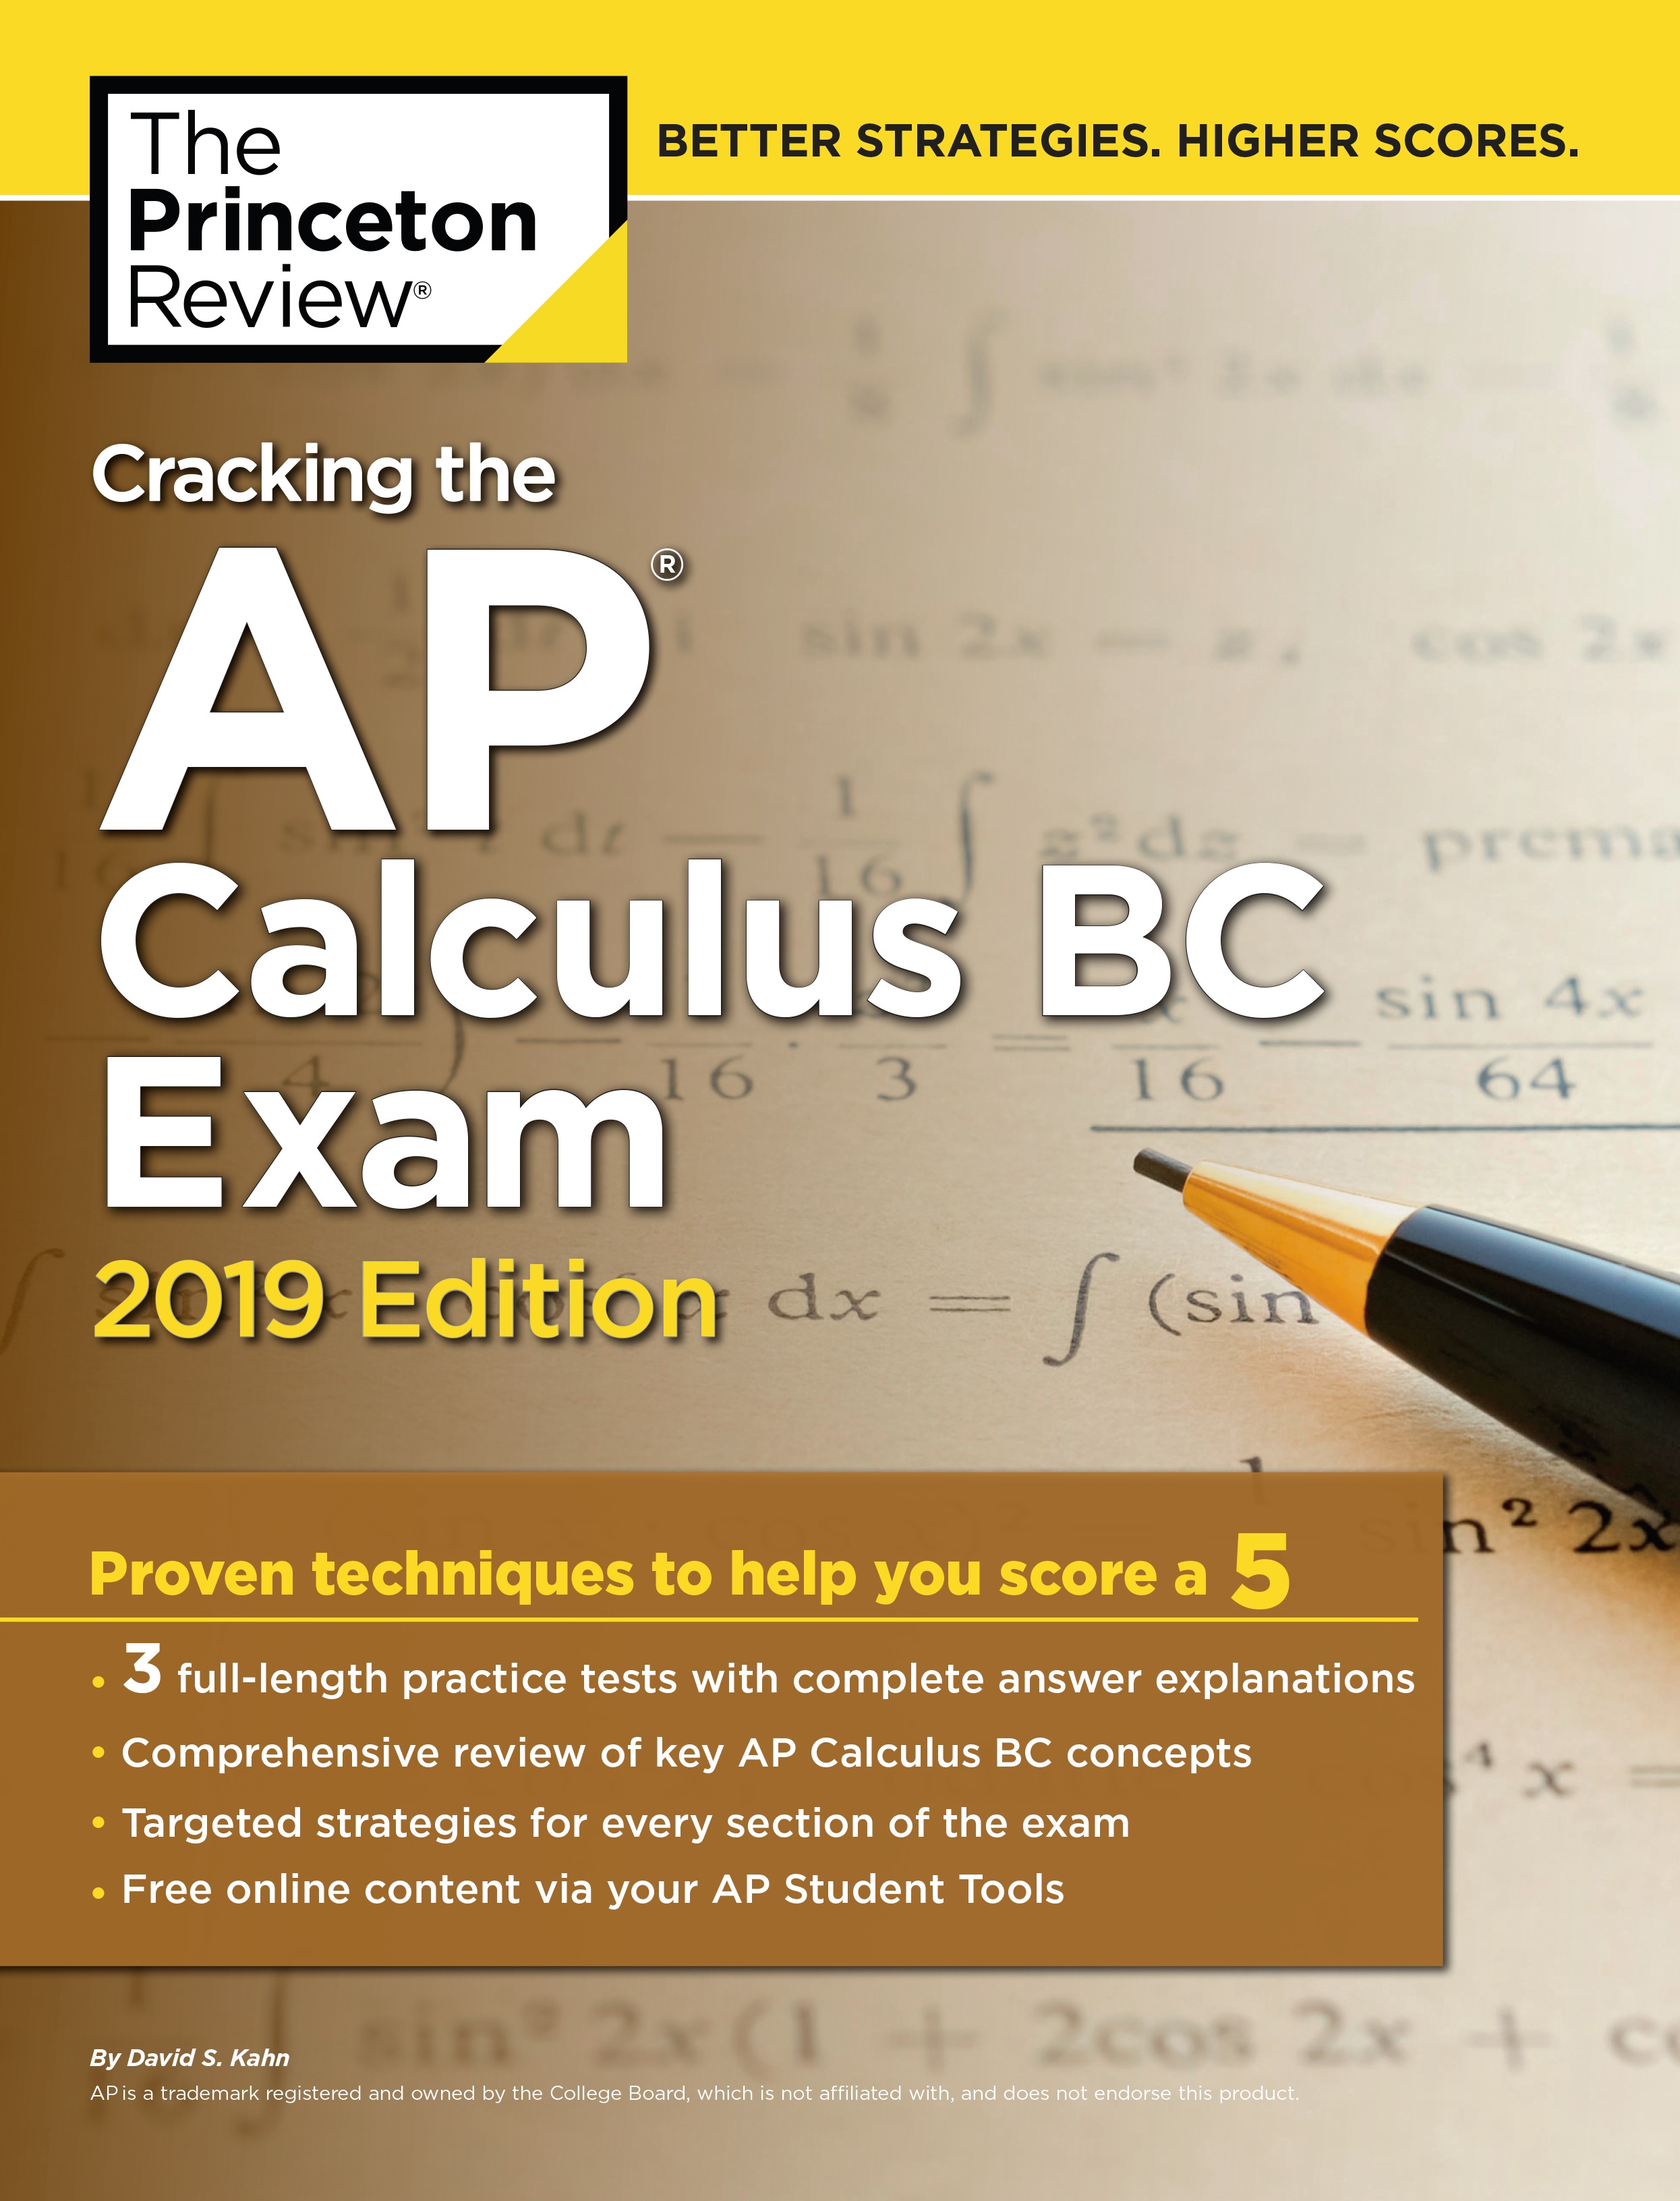 Cracking The AP Calculus BC Exam, 2019 Edition by Princeton Review ...